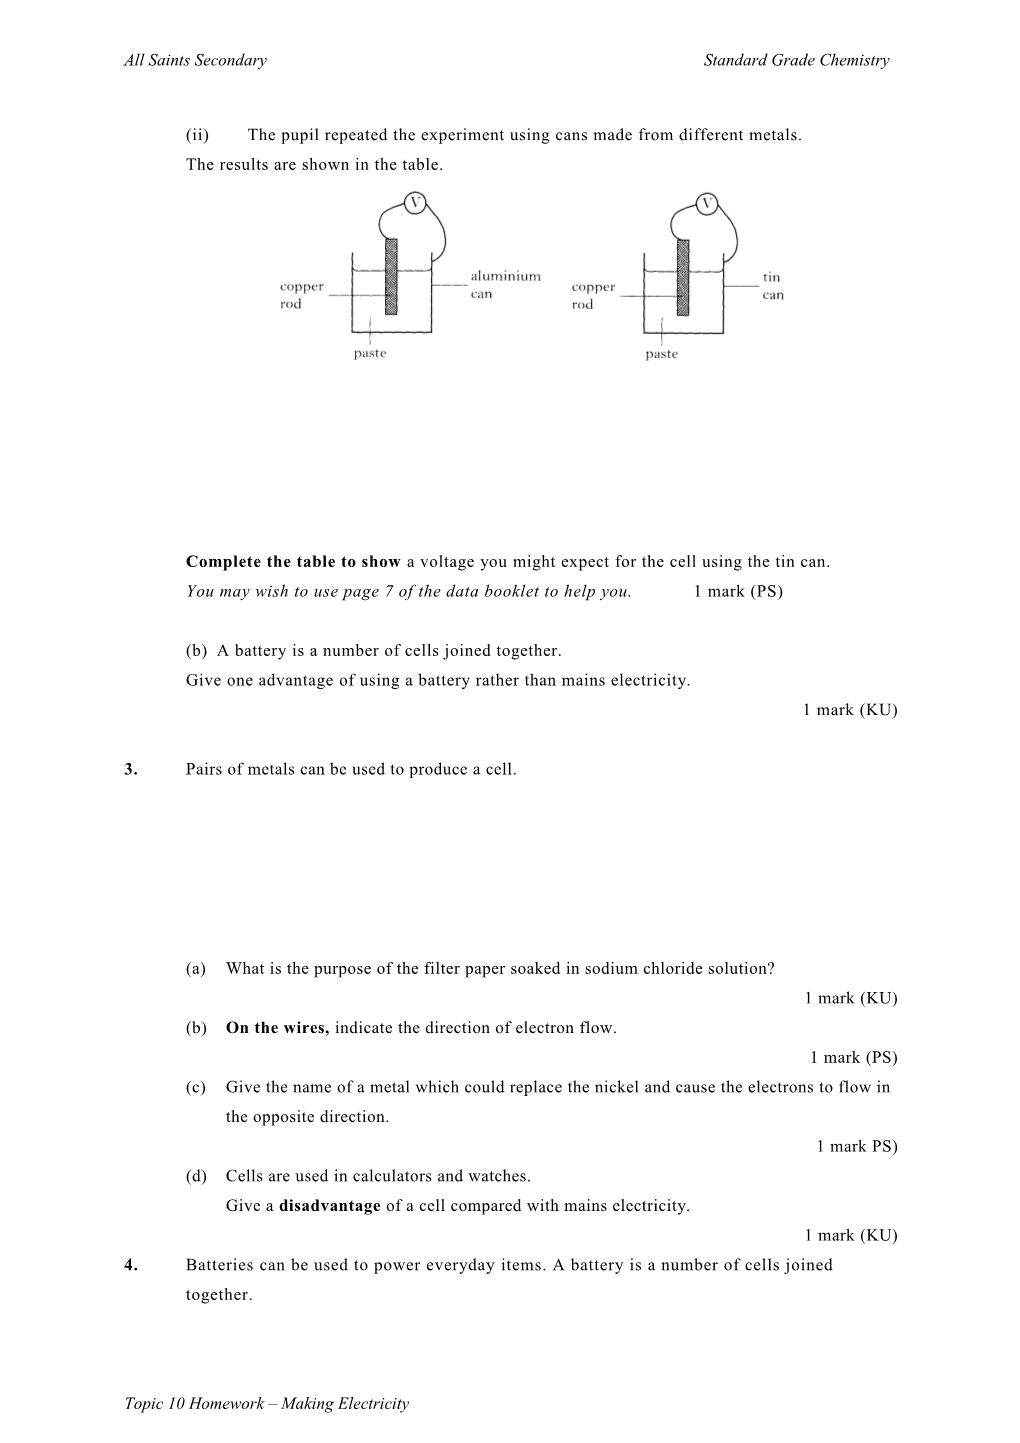 Topic 10 Making Electricity (General Level)